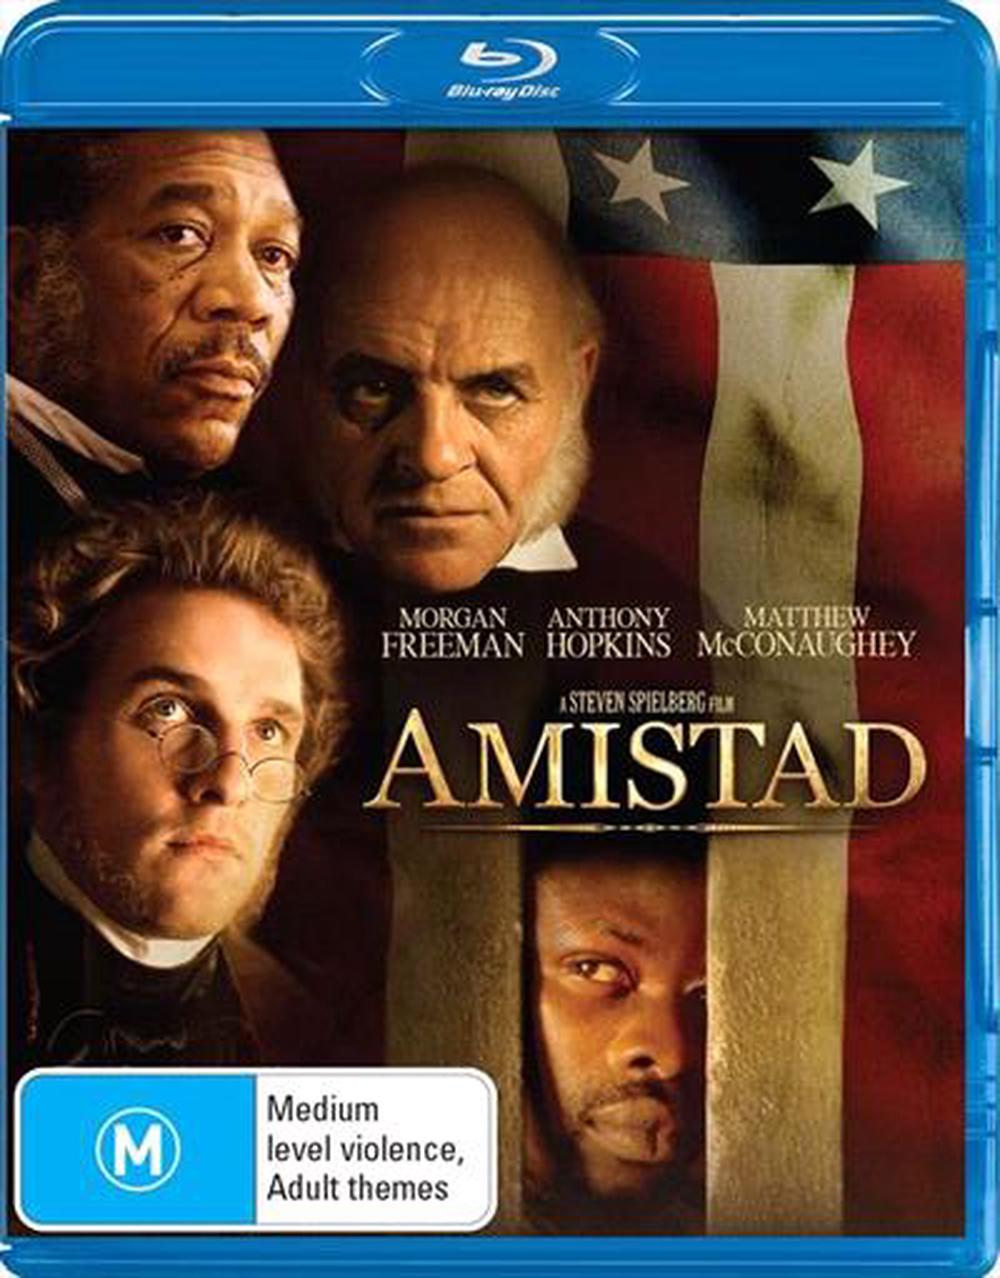 was amistad based on a true story